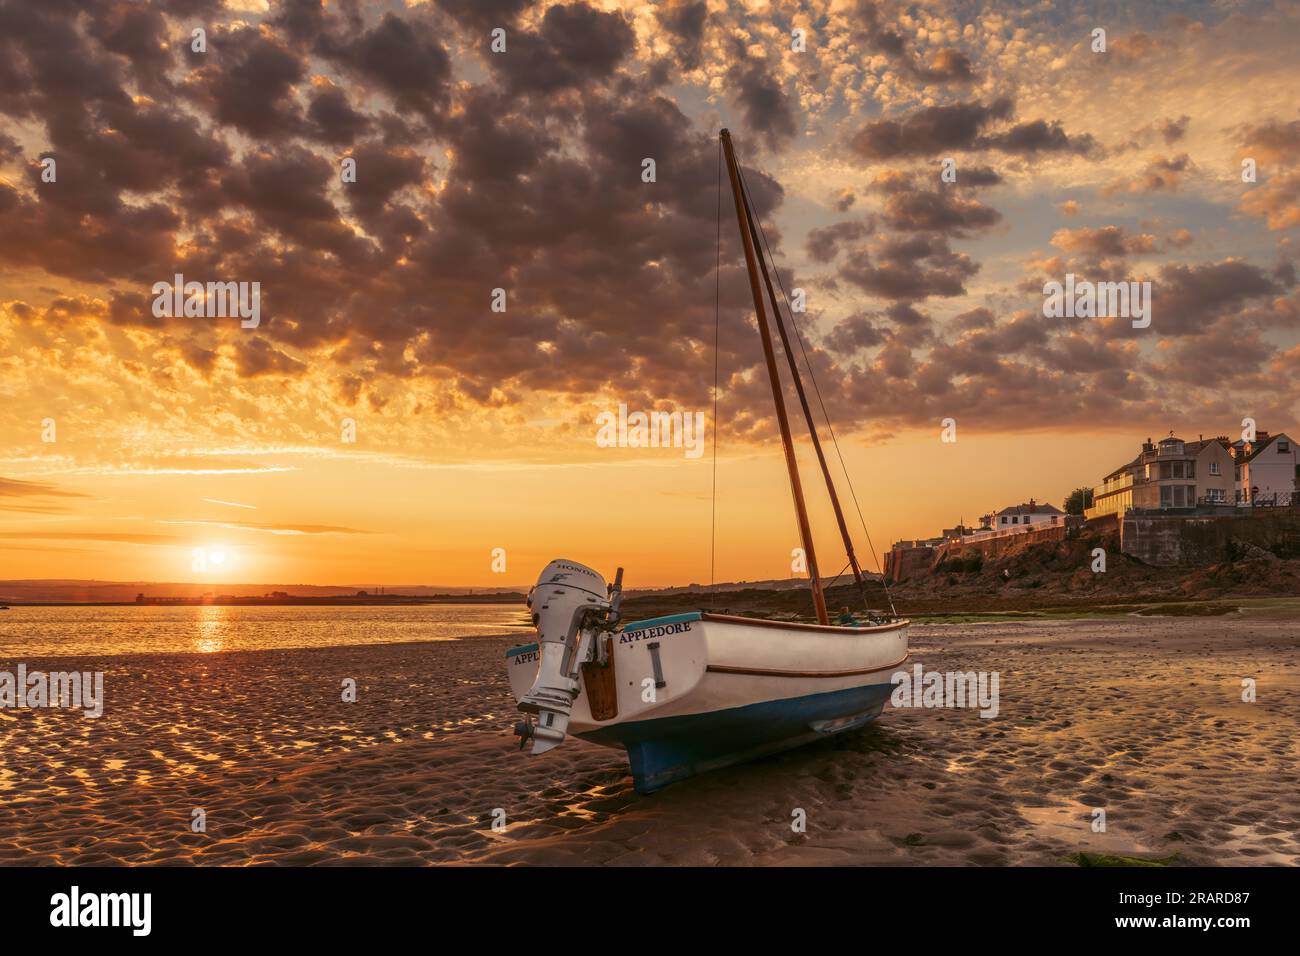 The sun crests the horizon on a late June sunrise, as the tide creeps towards one of the small boats that line the River Torridge estuary at Appledore Stock Photo